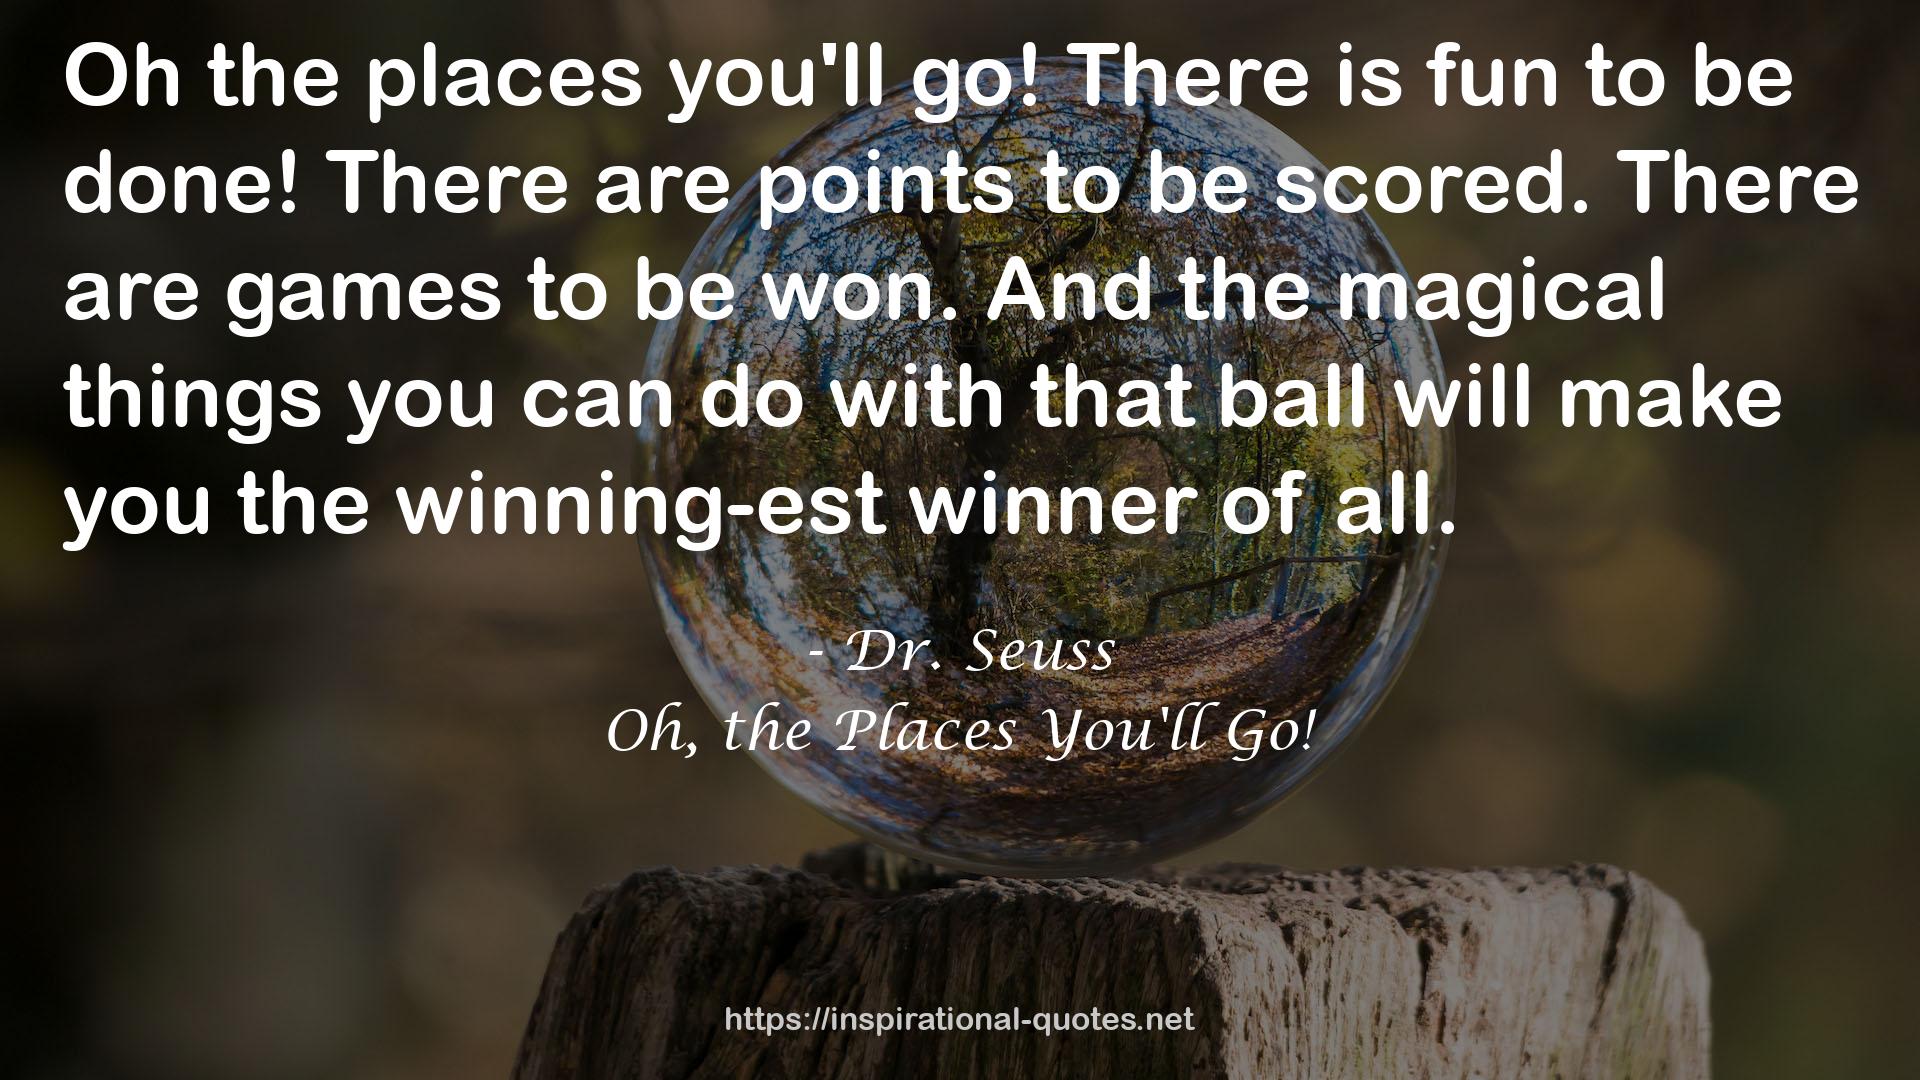 Oh, the Places You'll Go! QUOTES